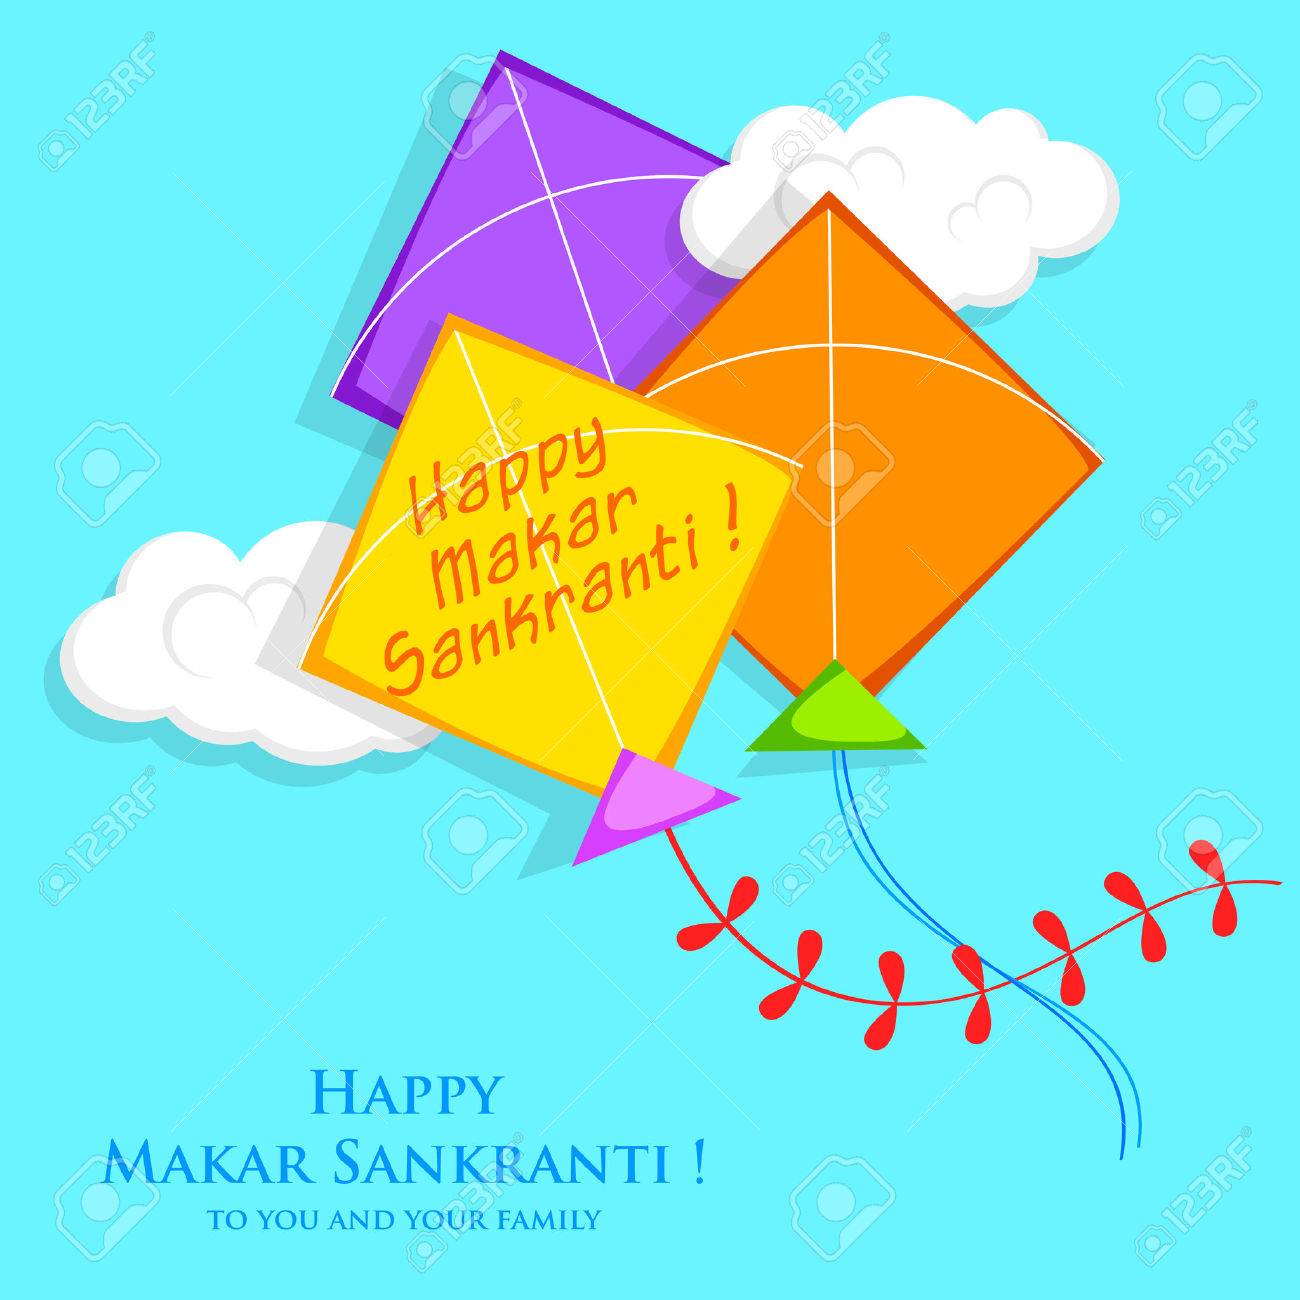 Download Makar Sankranti Wallpapers For 2013 With Quote - Makar Sankranti Wishes , HD Wallpaper & Backgrounds